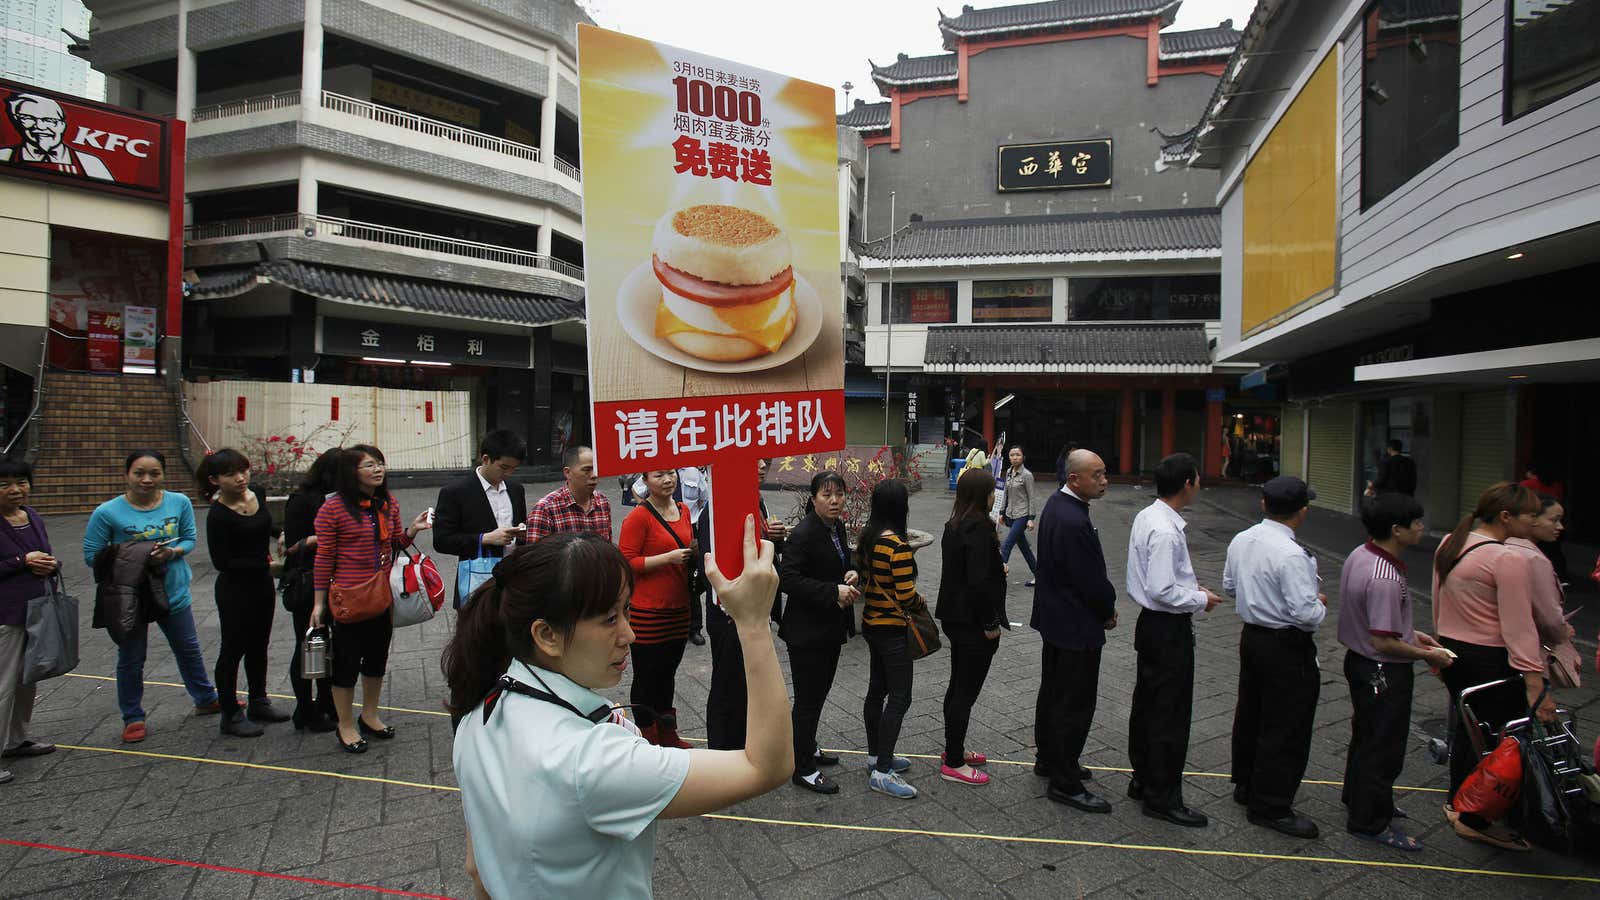 Handing out a thousand free egg McMuffins after a food scandal might not work this time.